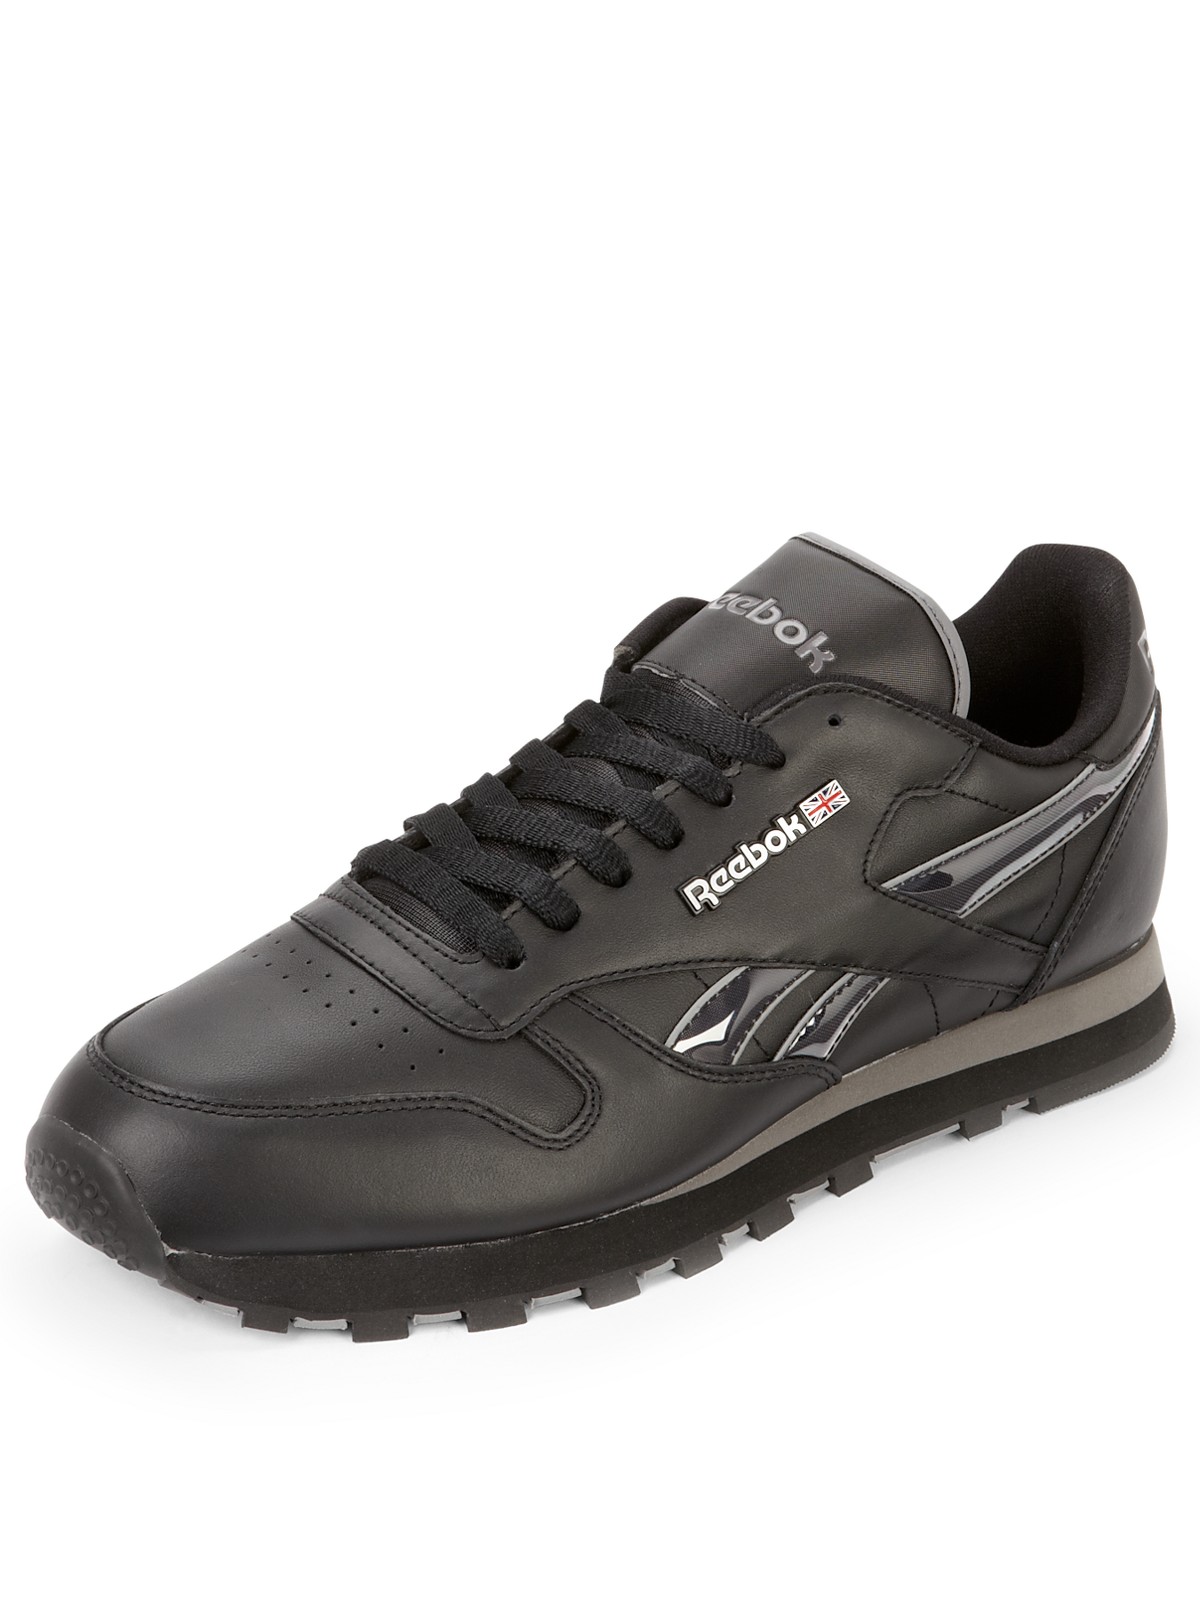 Mens Reebok Classic Leather Clip Athletic Shoe Black, 57% OFF